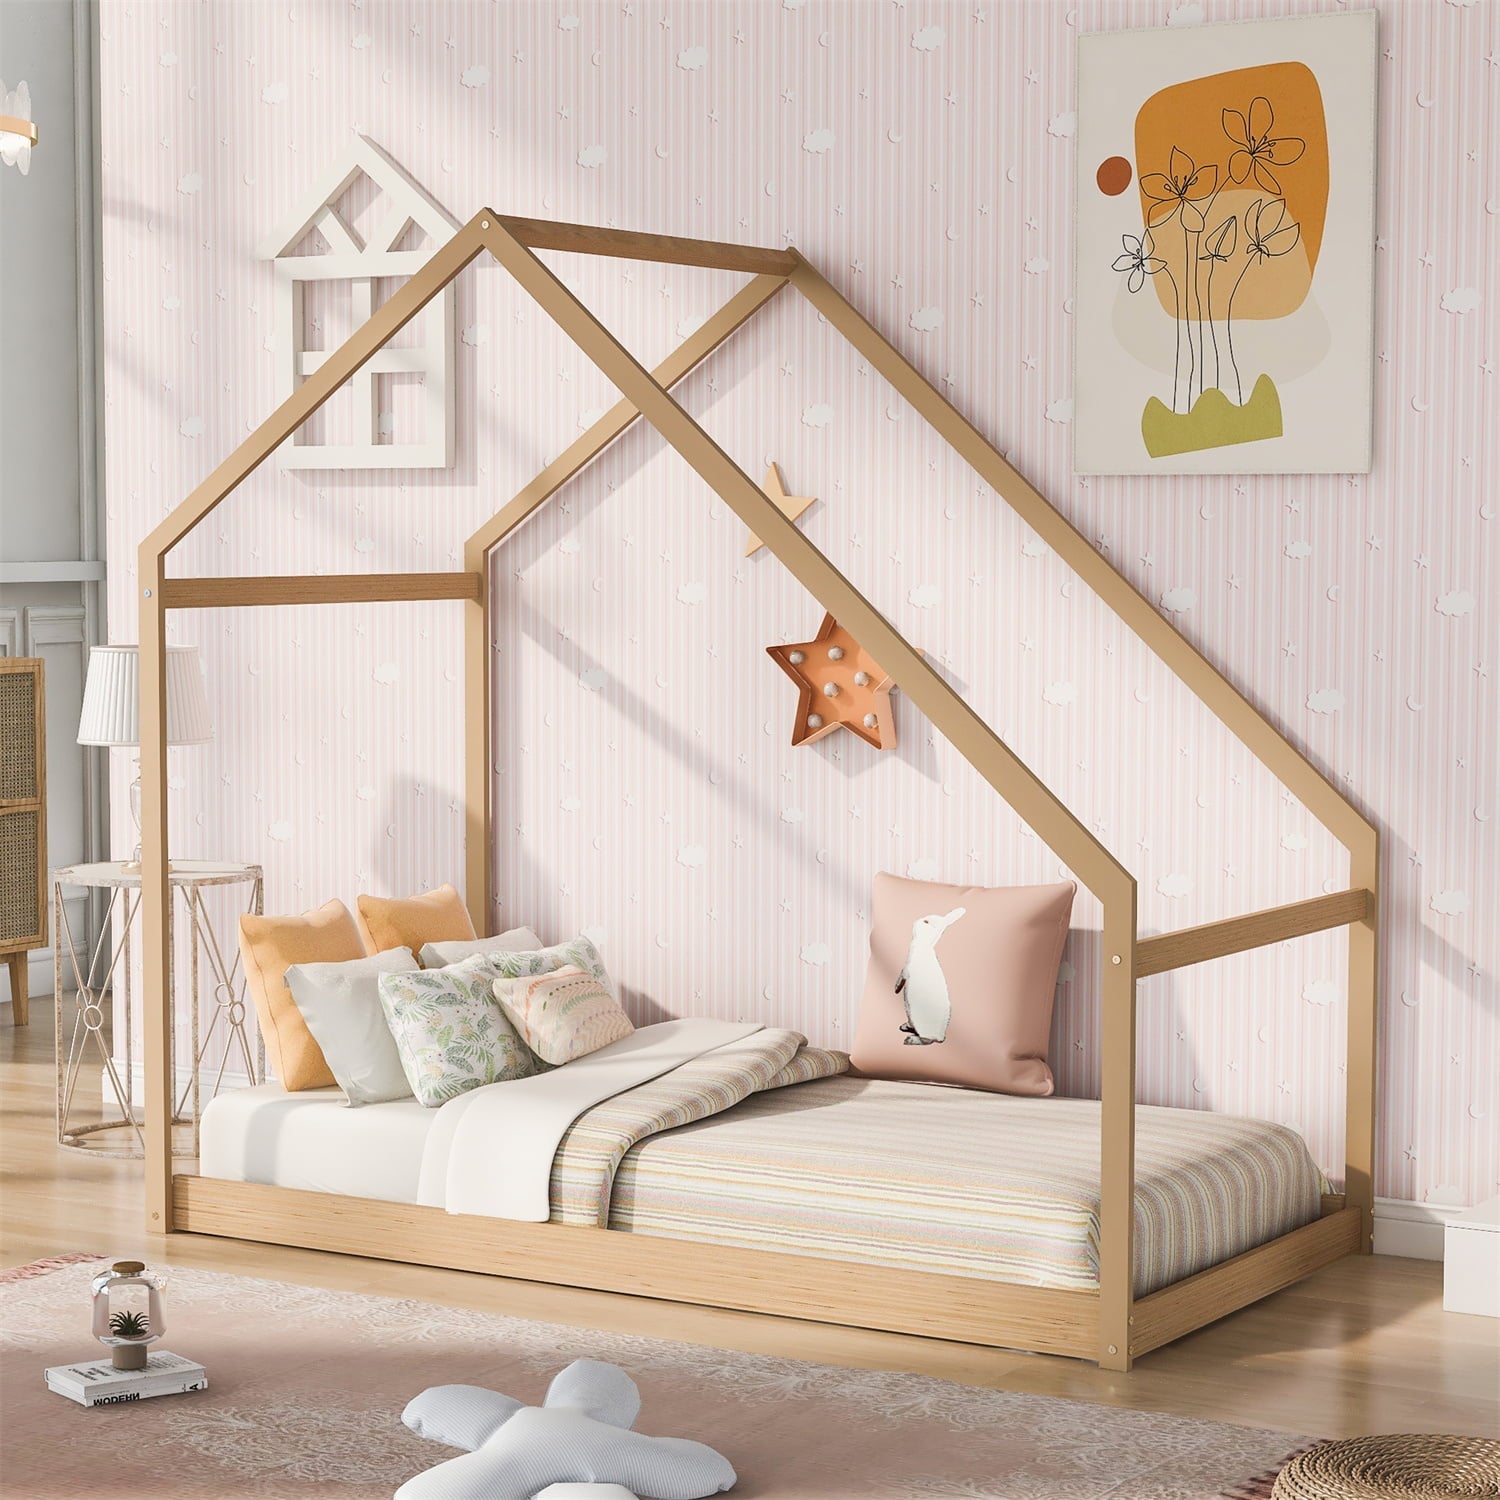 Twin House Bed Frame, Wood Floor Bed for Kids, Toddlers, Easy Assembly, Natural